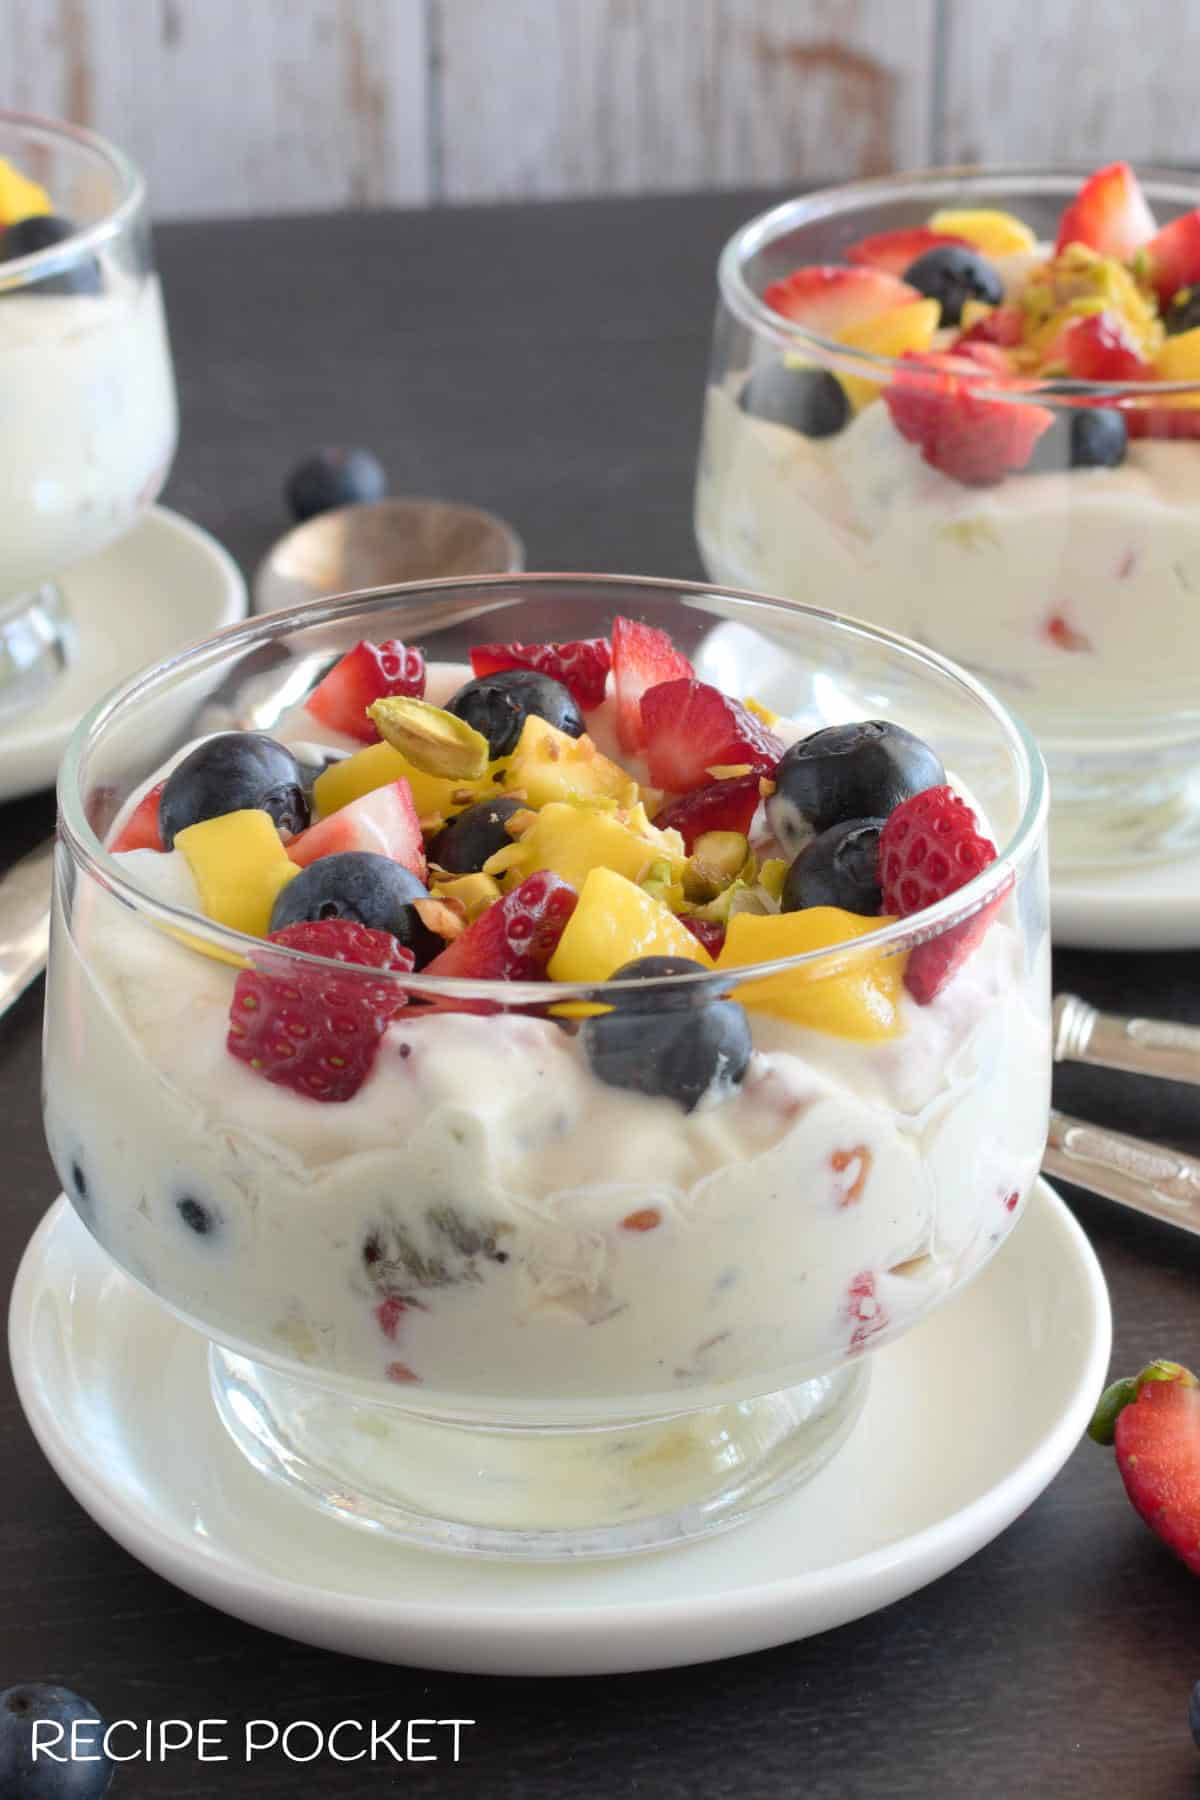 Diced strawberries, mango and blueberries in dessert bowls with cream.